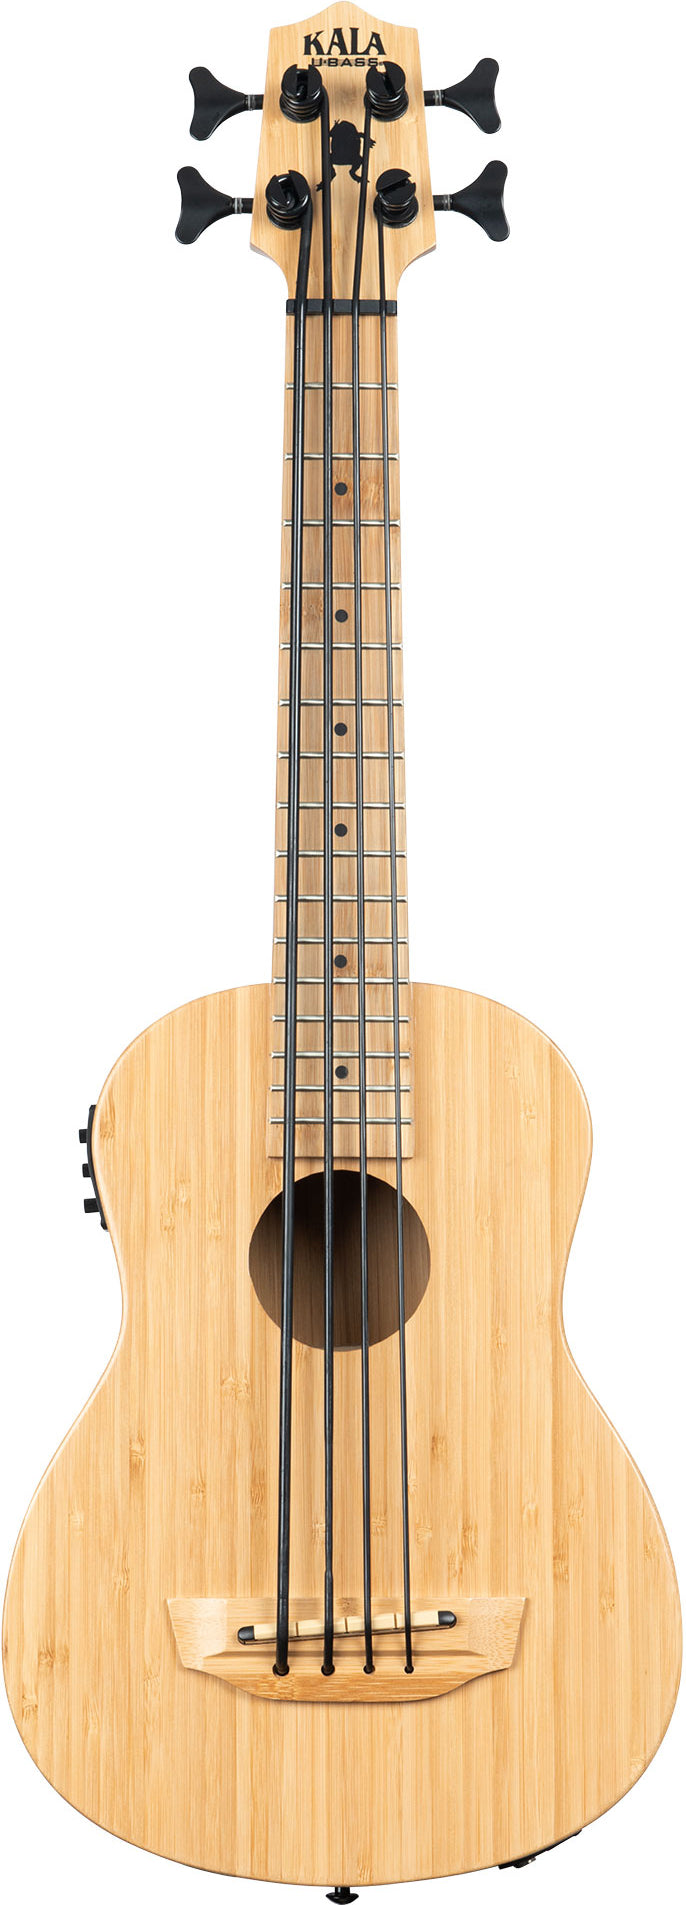 KALA Solid Bamboo Fretted U.Bass With Pickup